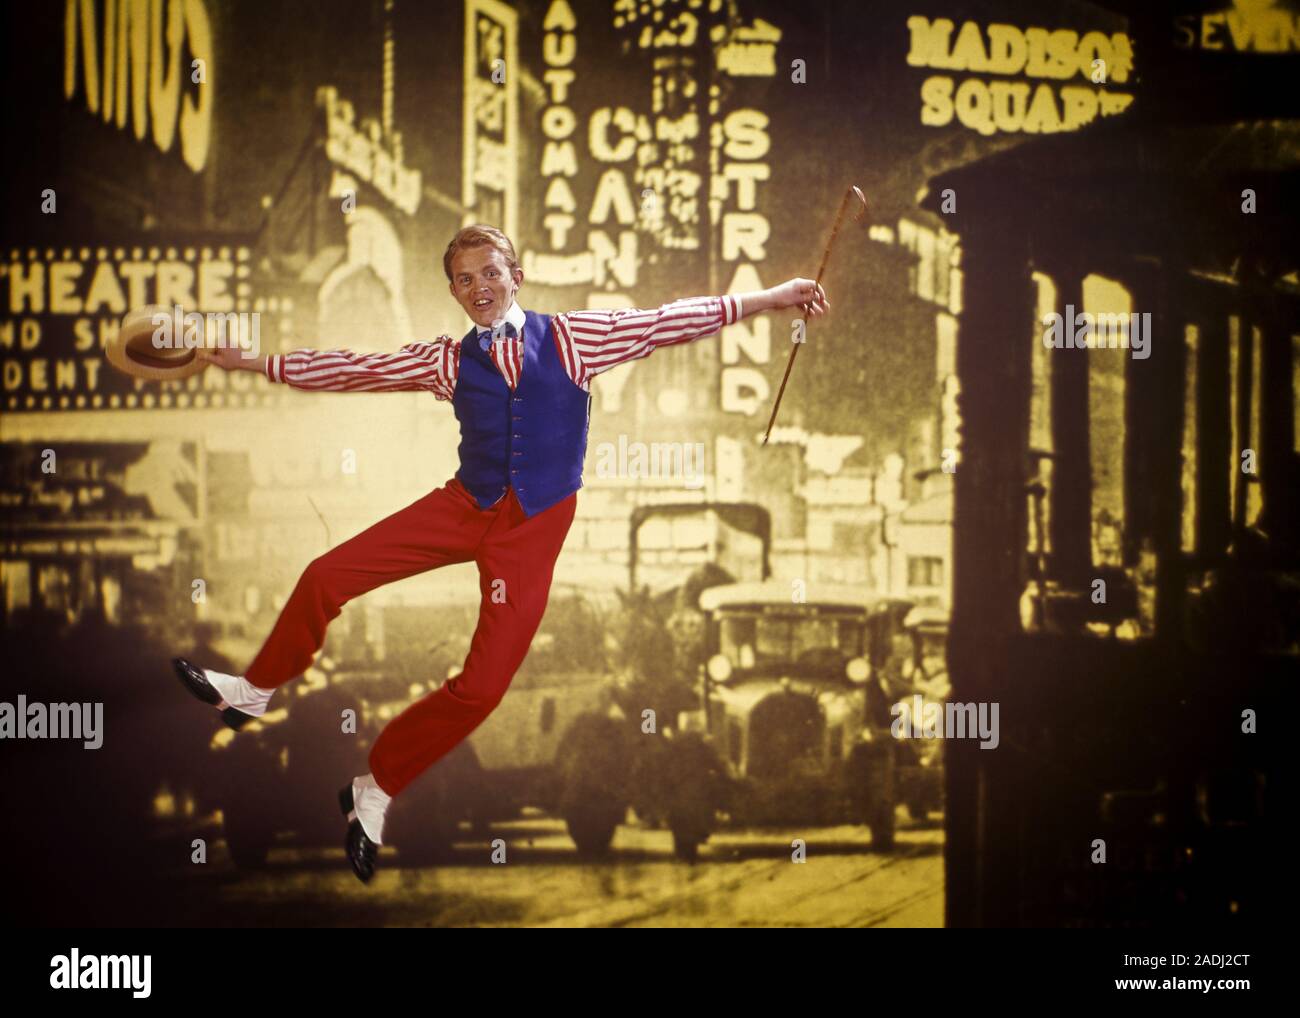 1970s VAUDEVILLE ERA TAP DANCING MAN JUMPING UP AND CLICKING HIS HEELS TOGETHER WITH SEPIA TONED 1920s SCENE OF TIMES SQUARE NYC - kd2846 PHT001 HARS STYLE COMMUNICATION VEHICLE HEELS YOUNG ADULT LEAPING MANHATTAN JOY LIFESTYLE SATISFACTION ACTOR CELEBRATION STUDIO SHOT CANE UNITED STATES COPY SPACE FULL-LENGTH PERSONS INSPIRATION UNITED STATES OF AMERICA AUTOMOBILE MALES ENTERTAINMENT CONFIDENCE TRANSPORTATION VEST TAP EYE CONTACT PERFORMING ARTS ACT DREAMS MIDTOWN NEON HAPPINESS HIS LEAP PERFORMER AND AUTOS EXCITEMENT GOTHAM PRIDE UP VAUDEVILLE ENTERTAINER NYC OCCUPATIONS AUTOMAT CONCEPTUAL Stock Photo